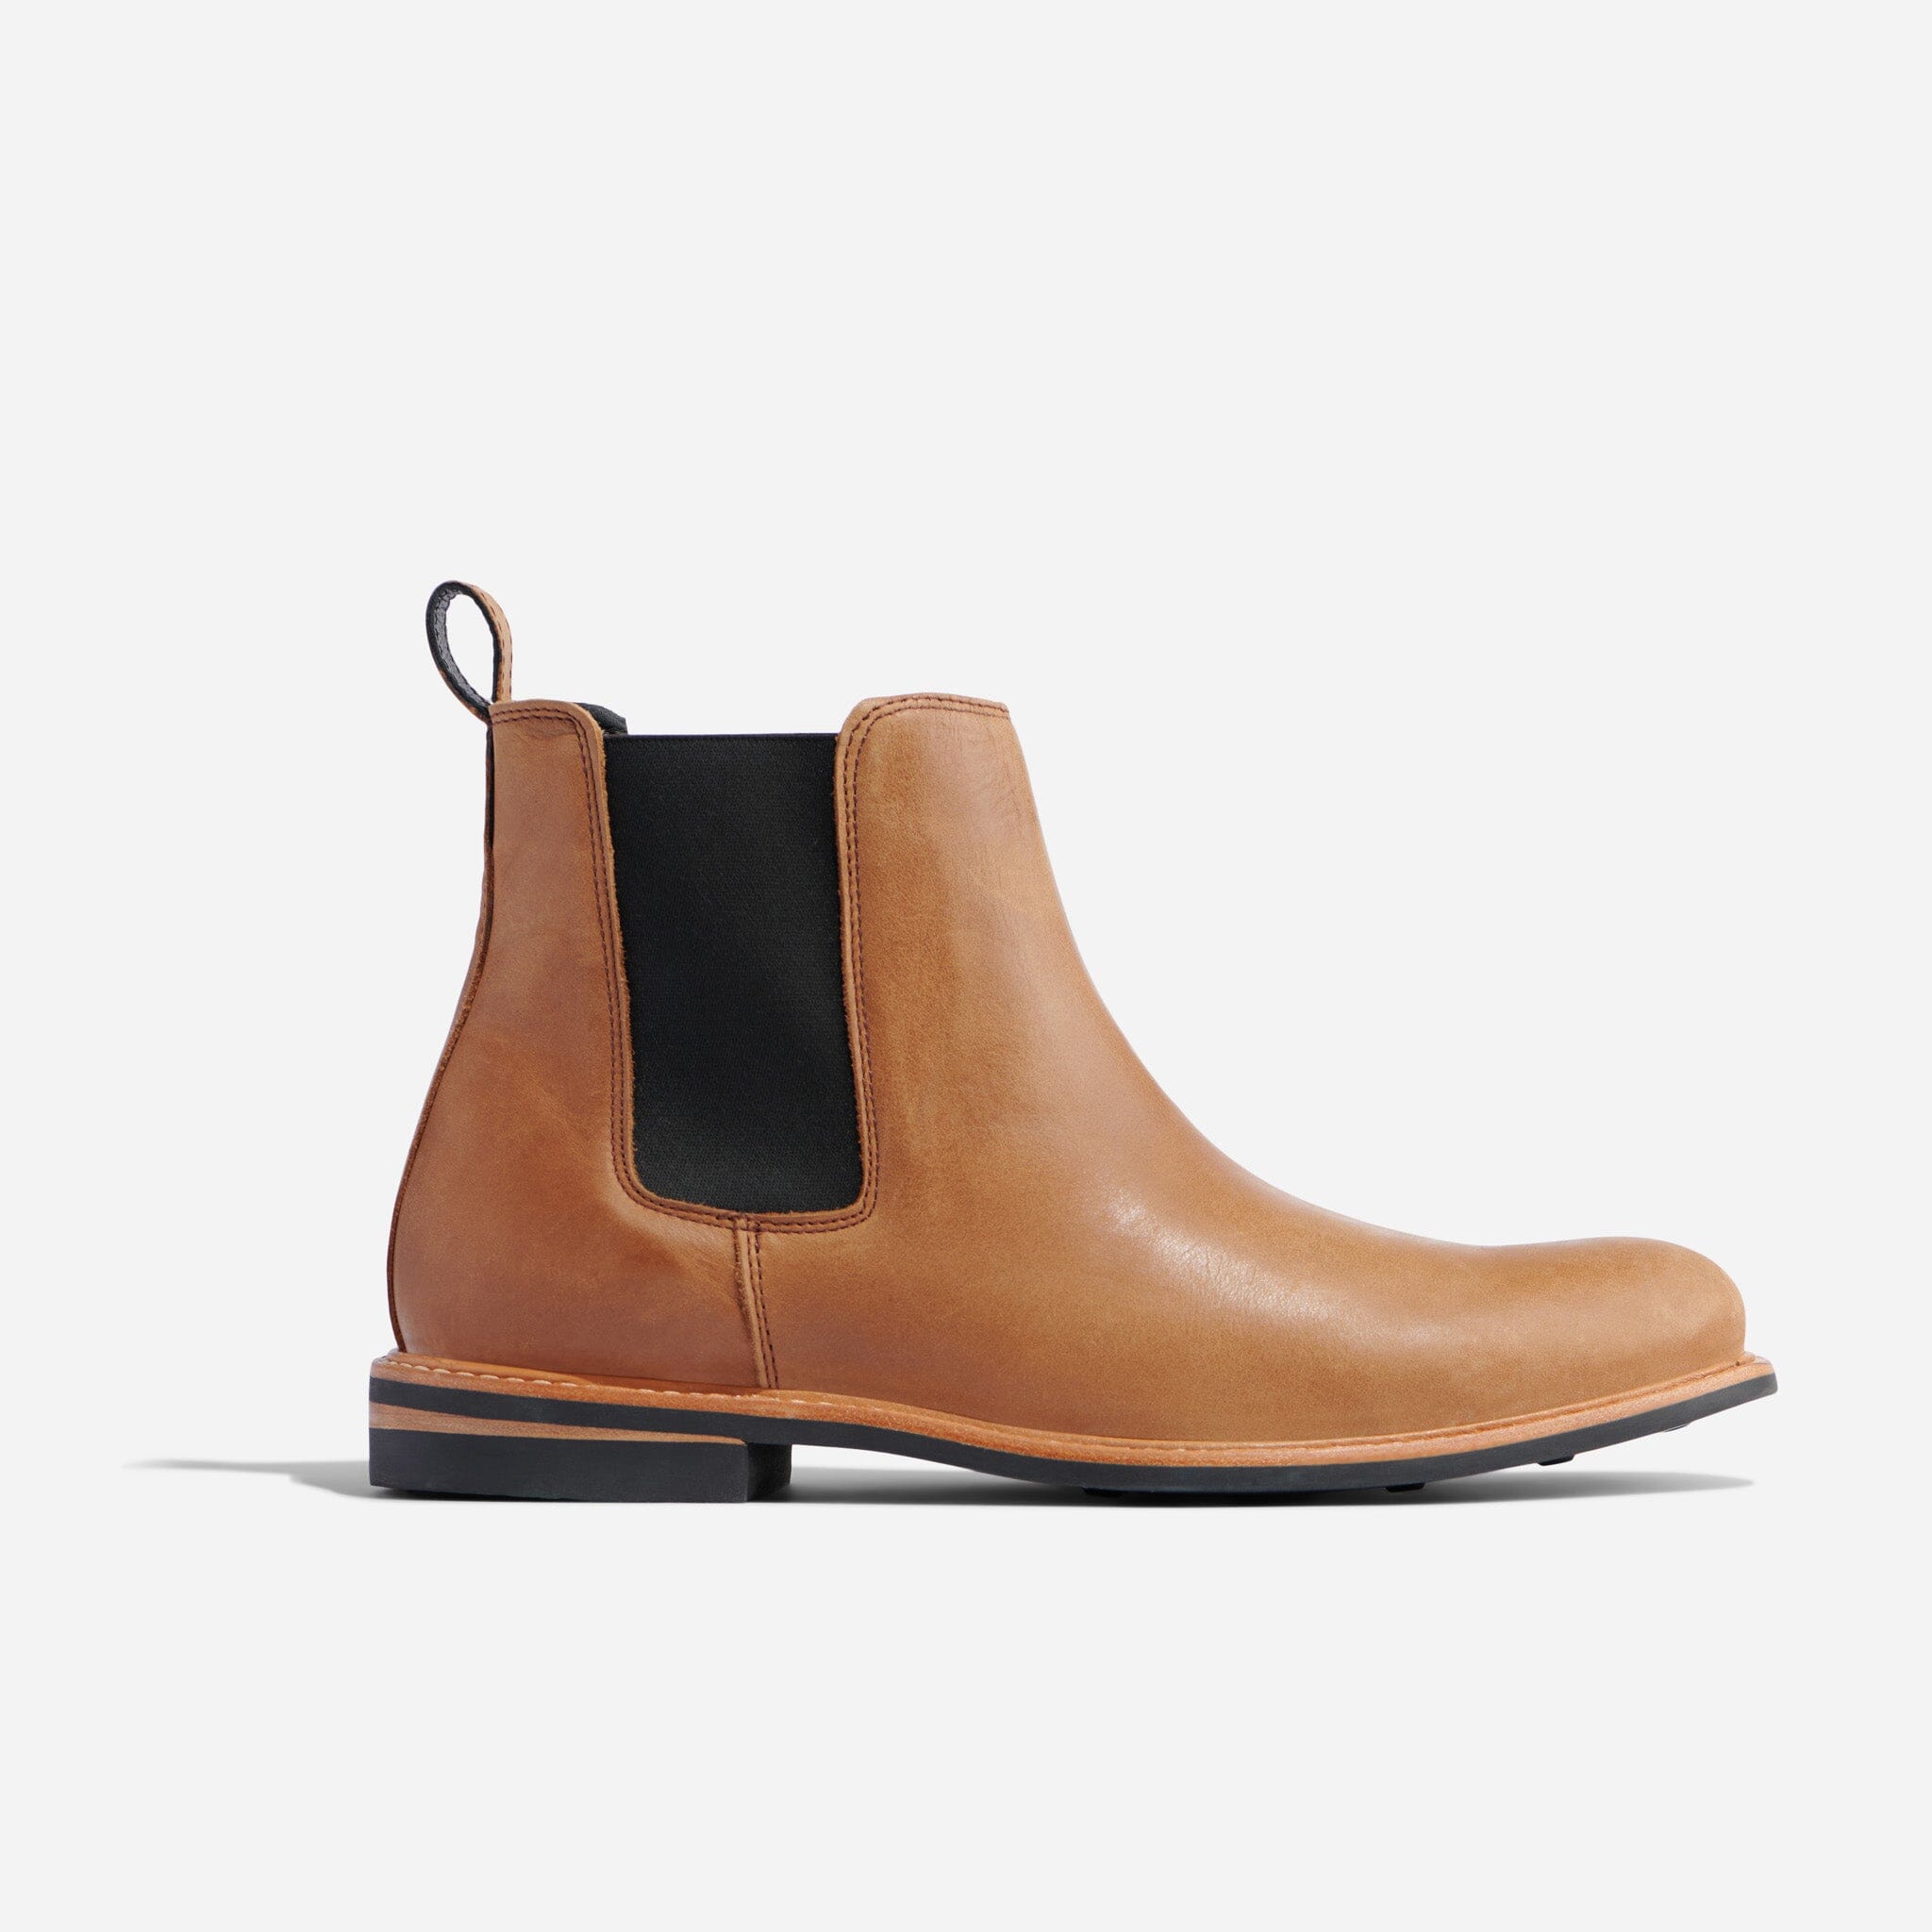 Versatile and Durable Boots for Every Occasion